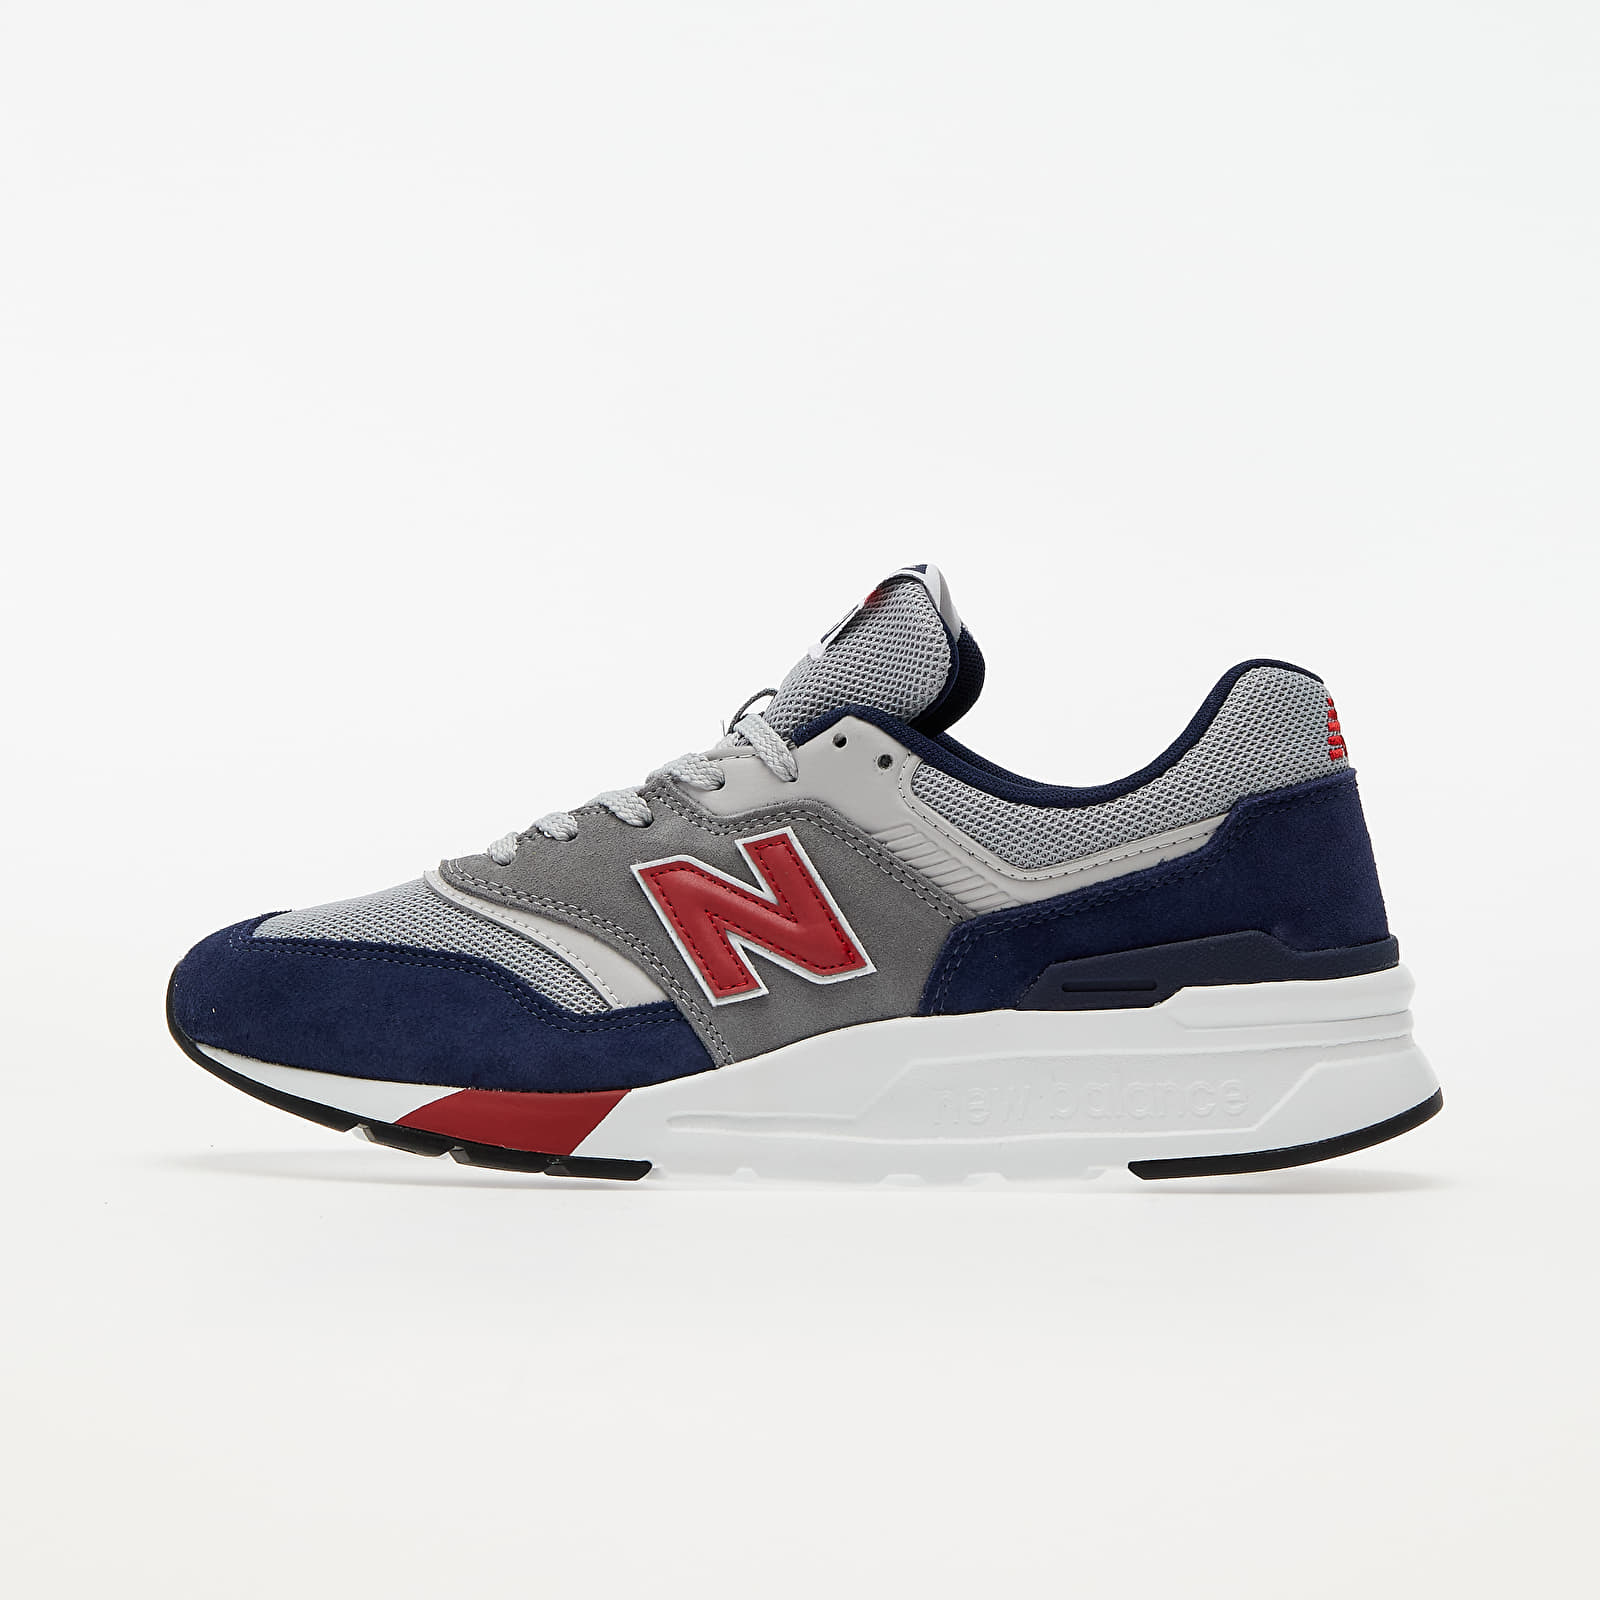 Chaussures et baskets homme New Balance 997 Blue/ Grey/ Red